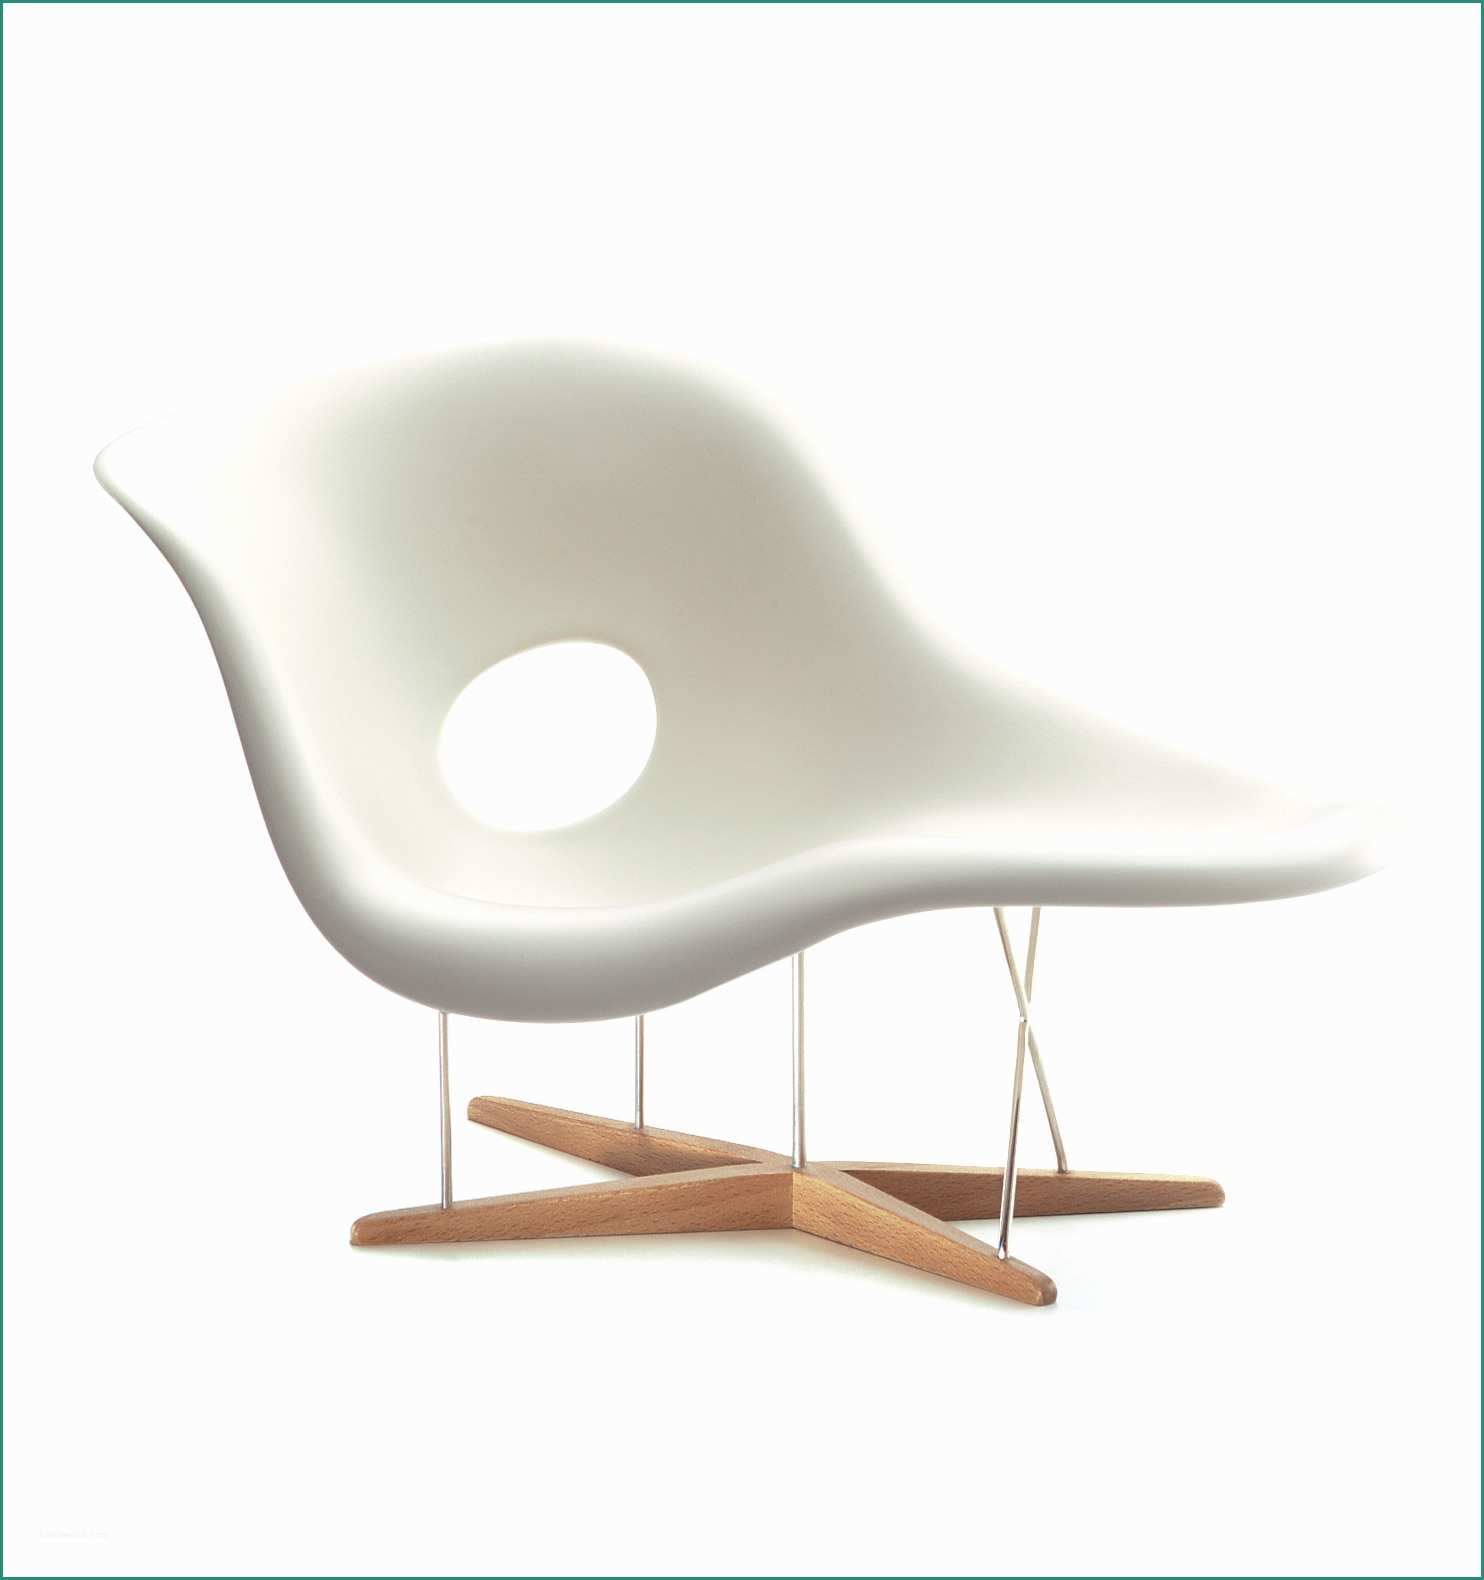 Sedia Dsw Charles Eames E Chaise Eiffel Eames Excellent Charles Eames Sthle Stunning